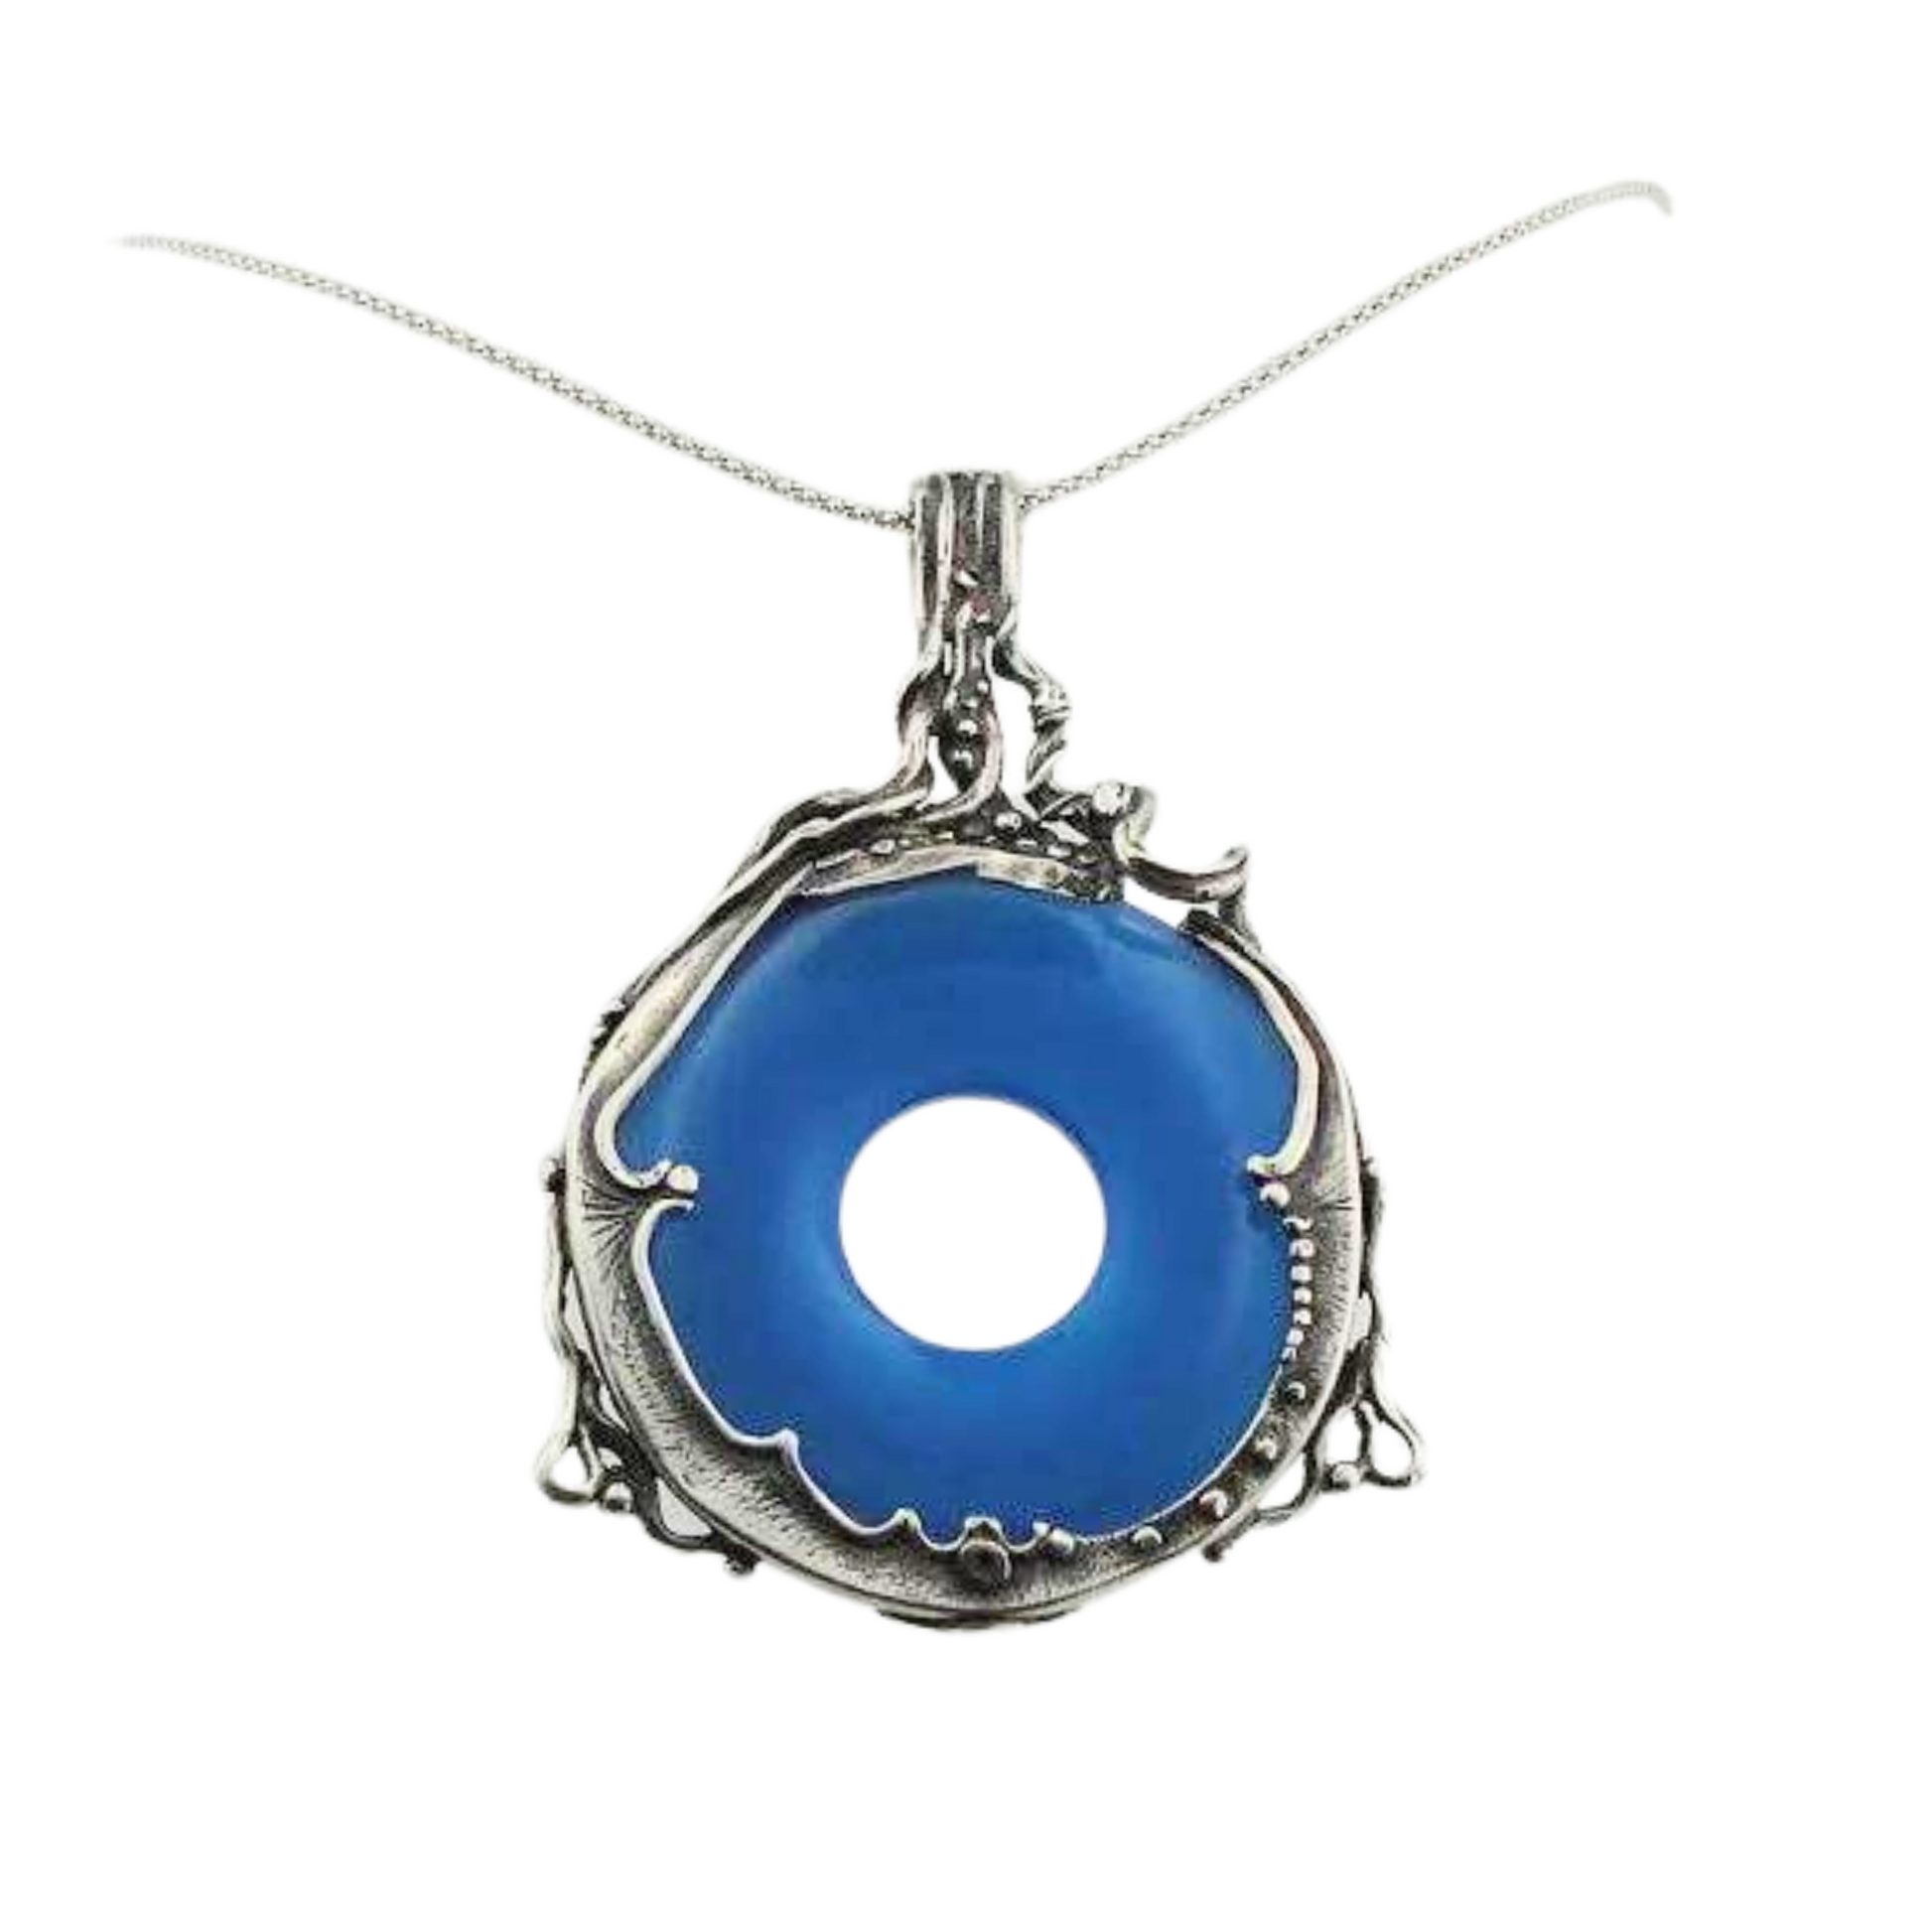 A HUGE 40mm Genuine natural Blue agate stone held by a beautiful sculpture of 925 sterling silver, Israeli jewelry, Israeli design, gift for her, unisex jewelry, unisex pendant, round blue agate pendant, boho chic jewelry, made in Israel